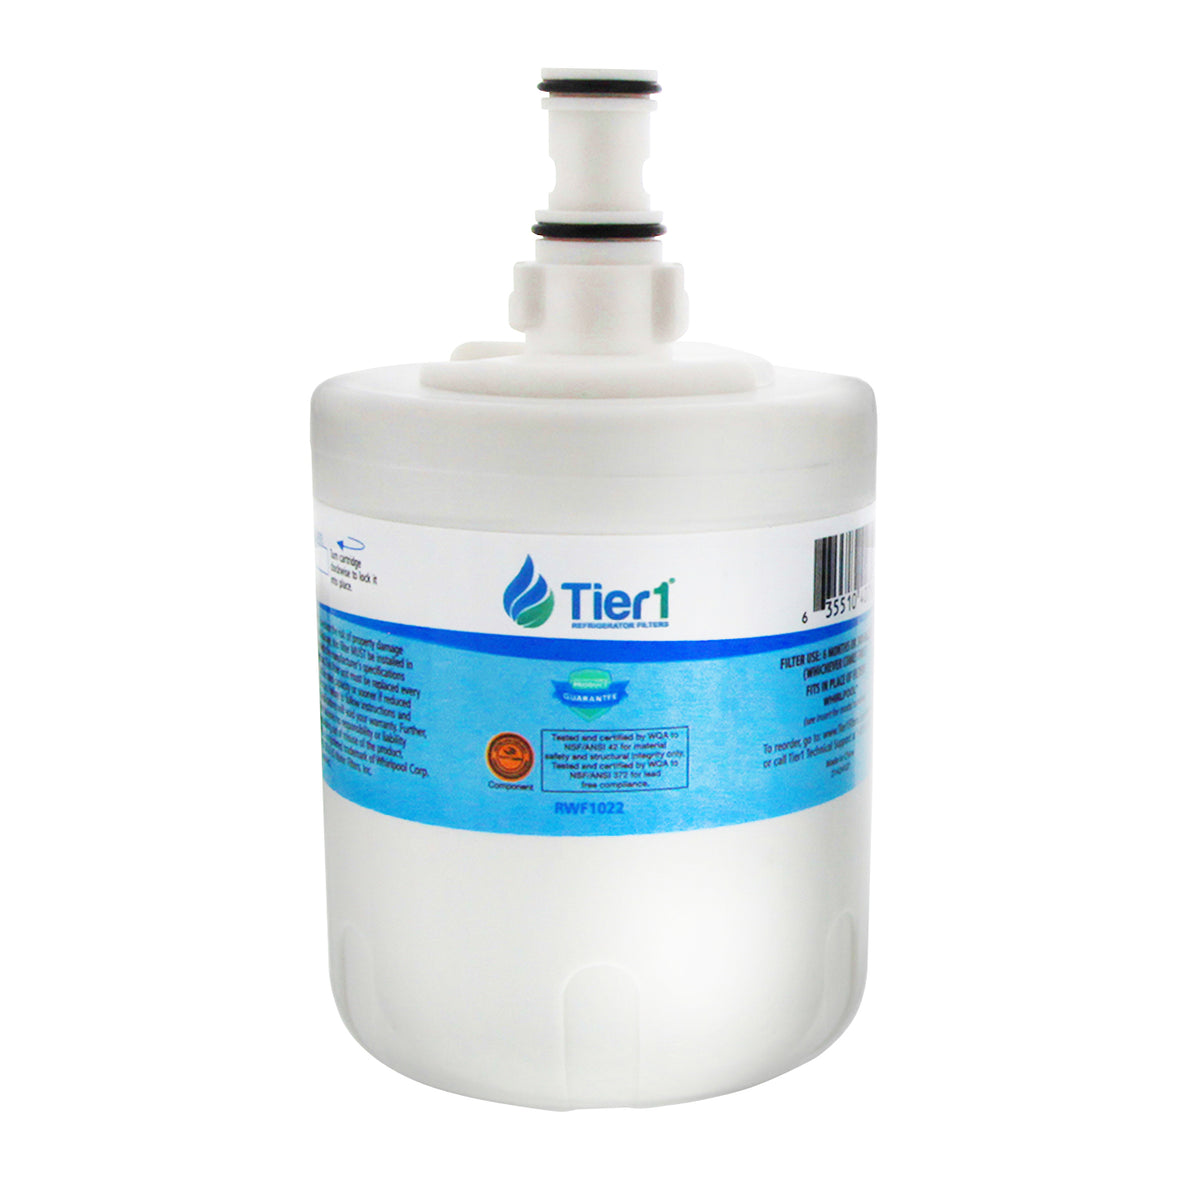 Tier1 Whirlpool 8171413/8171414 Refrigerator Water Filter Replacement Comparable